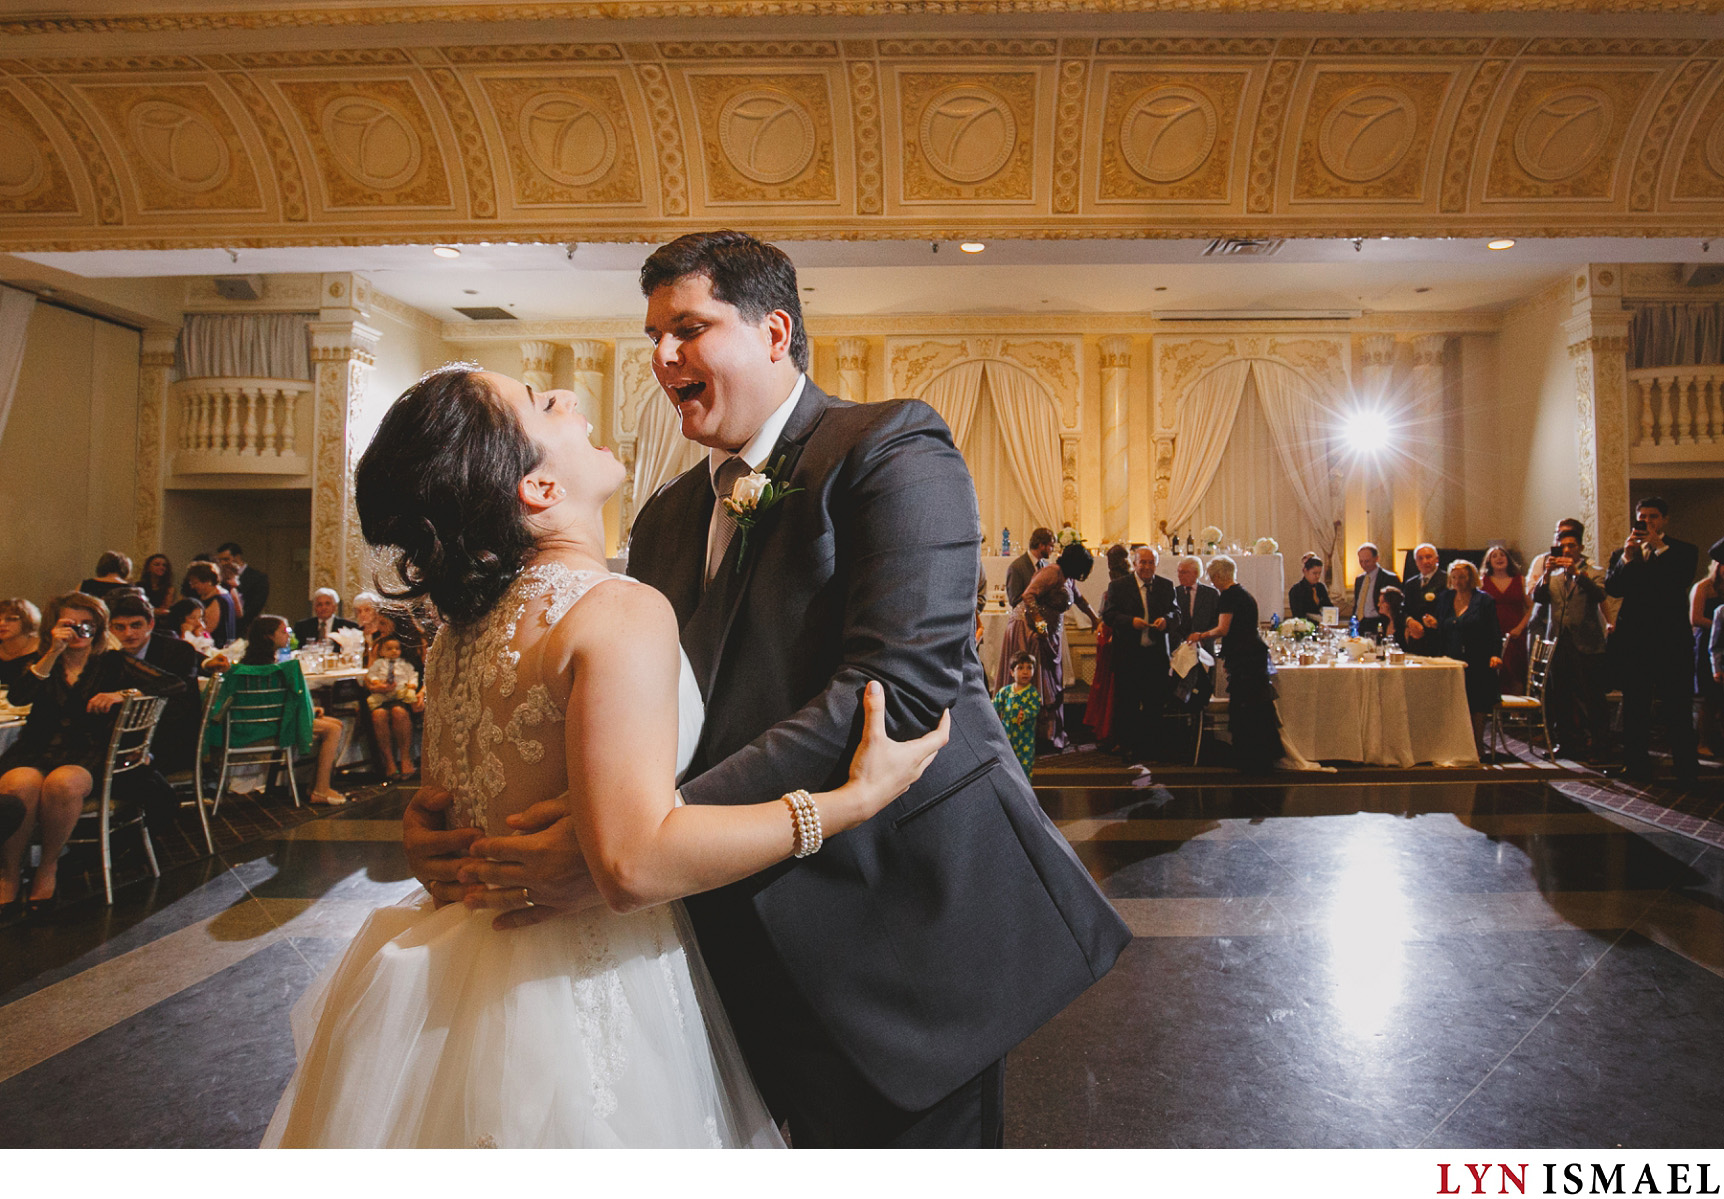 A couple's first dance at their wedding reception in Paradise Banquet Hall.